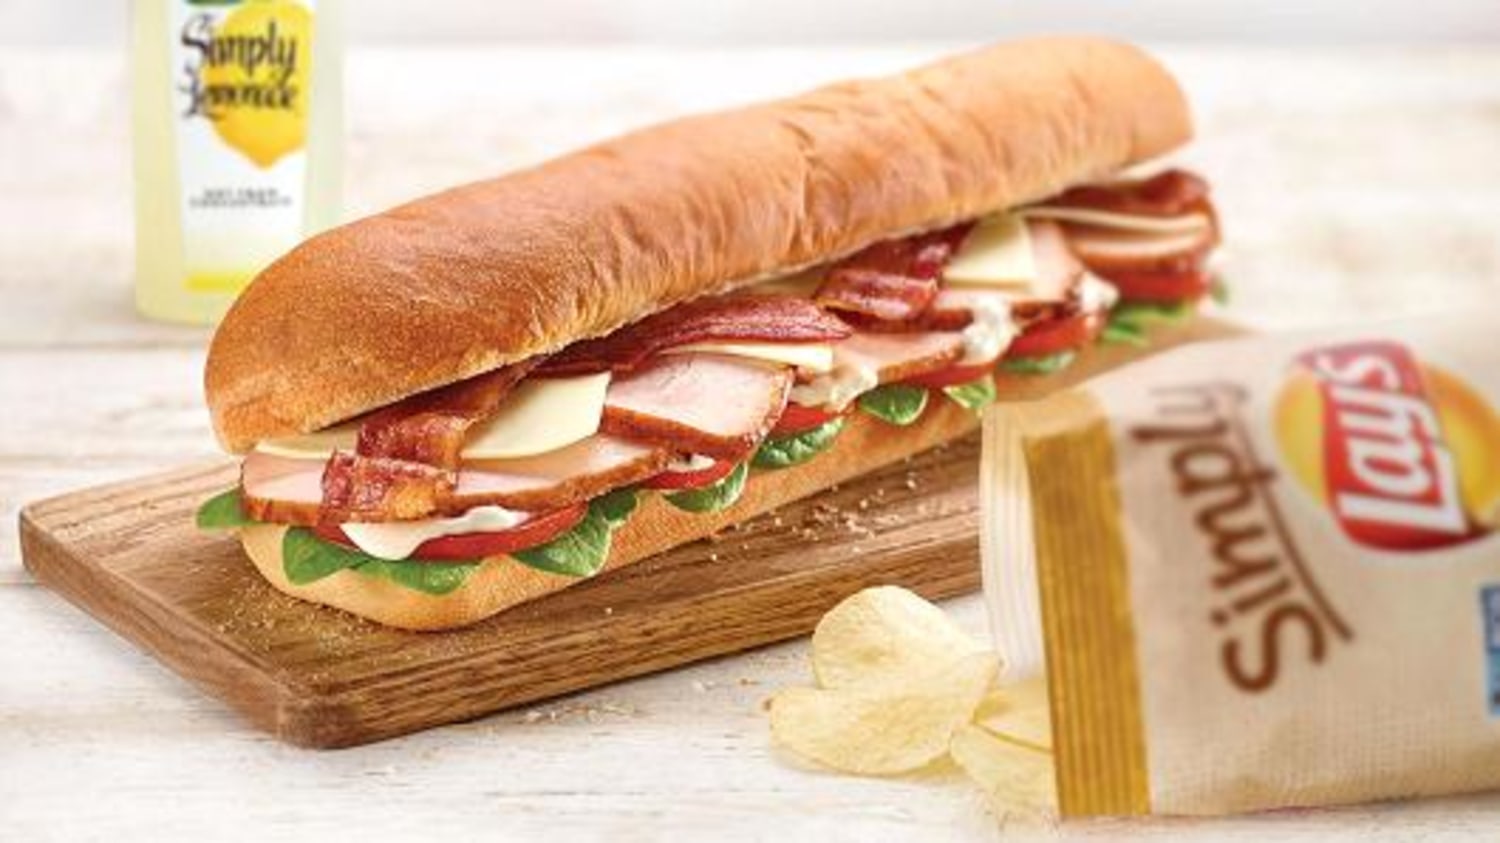 Subway introduces two new sandwiches